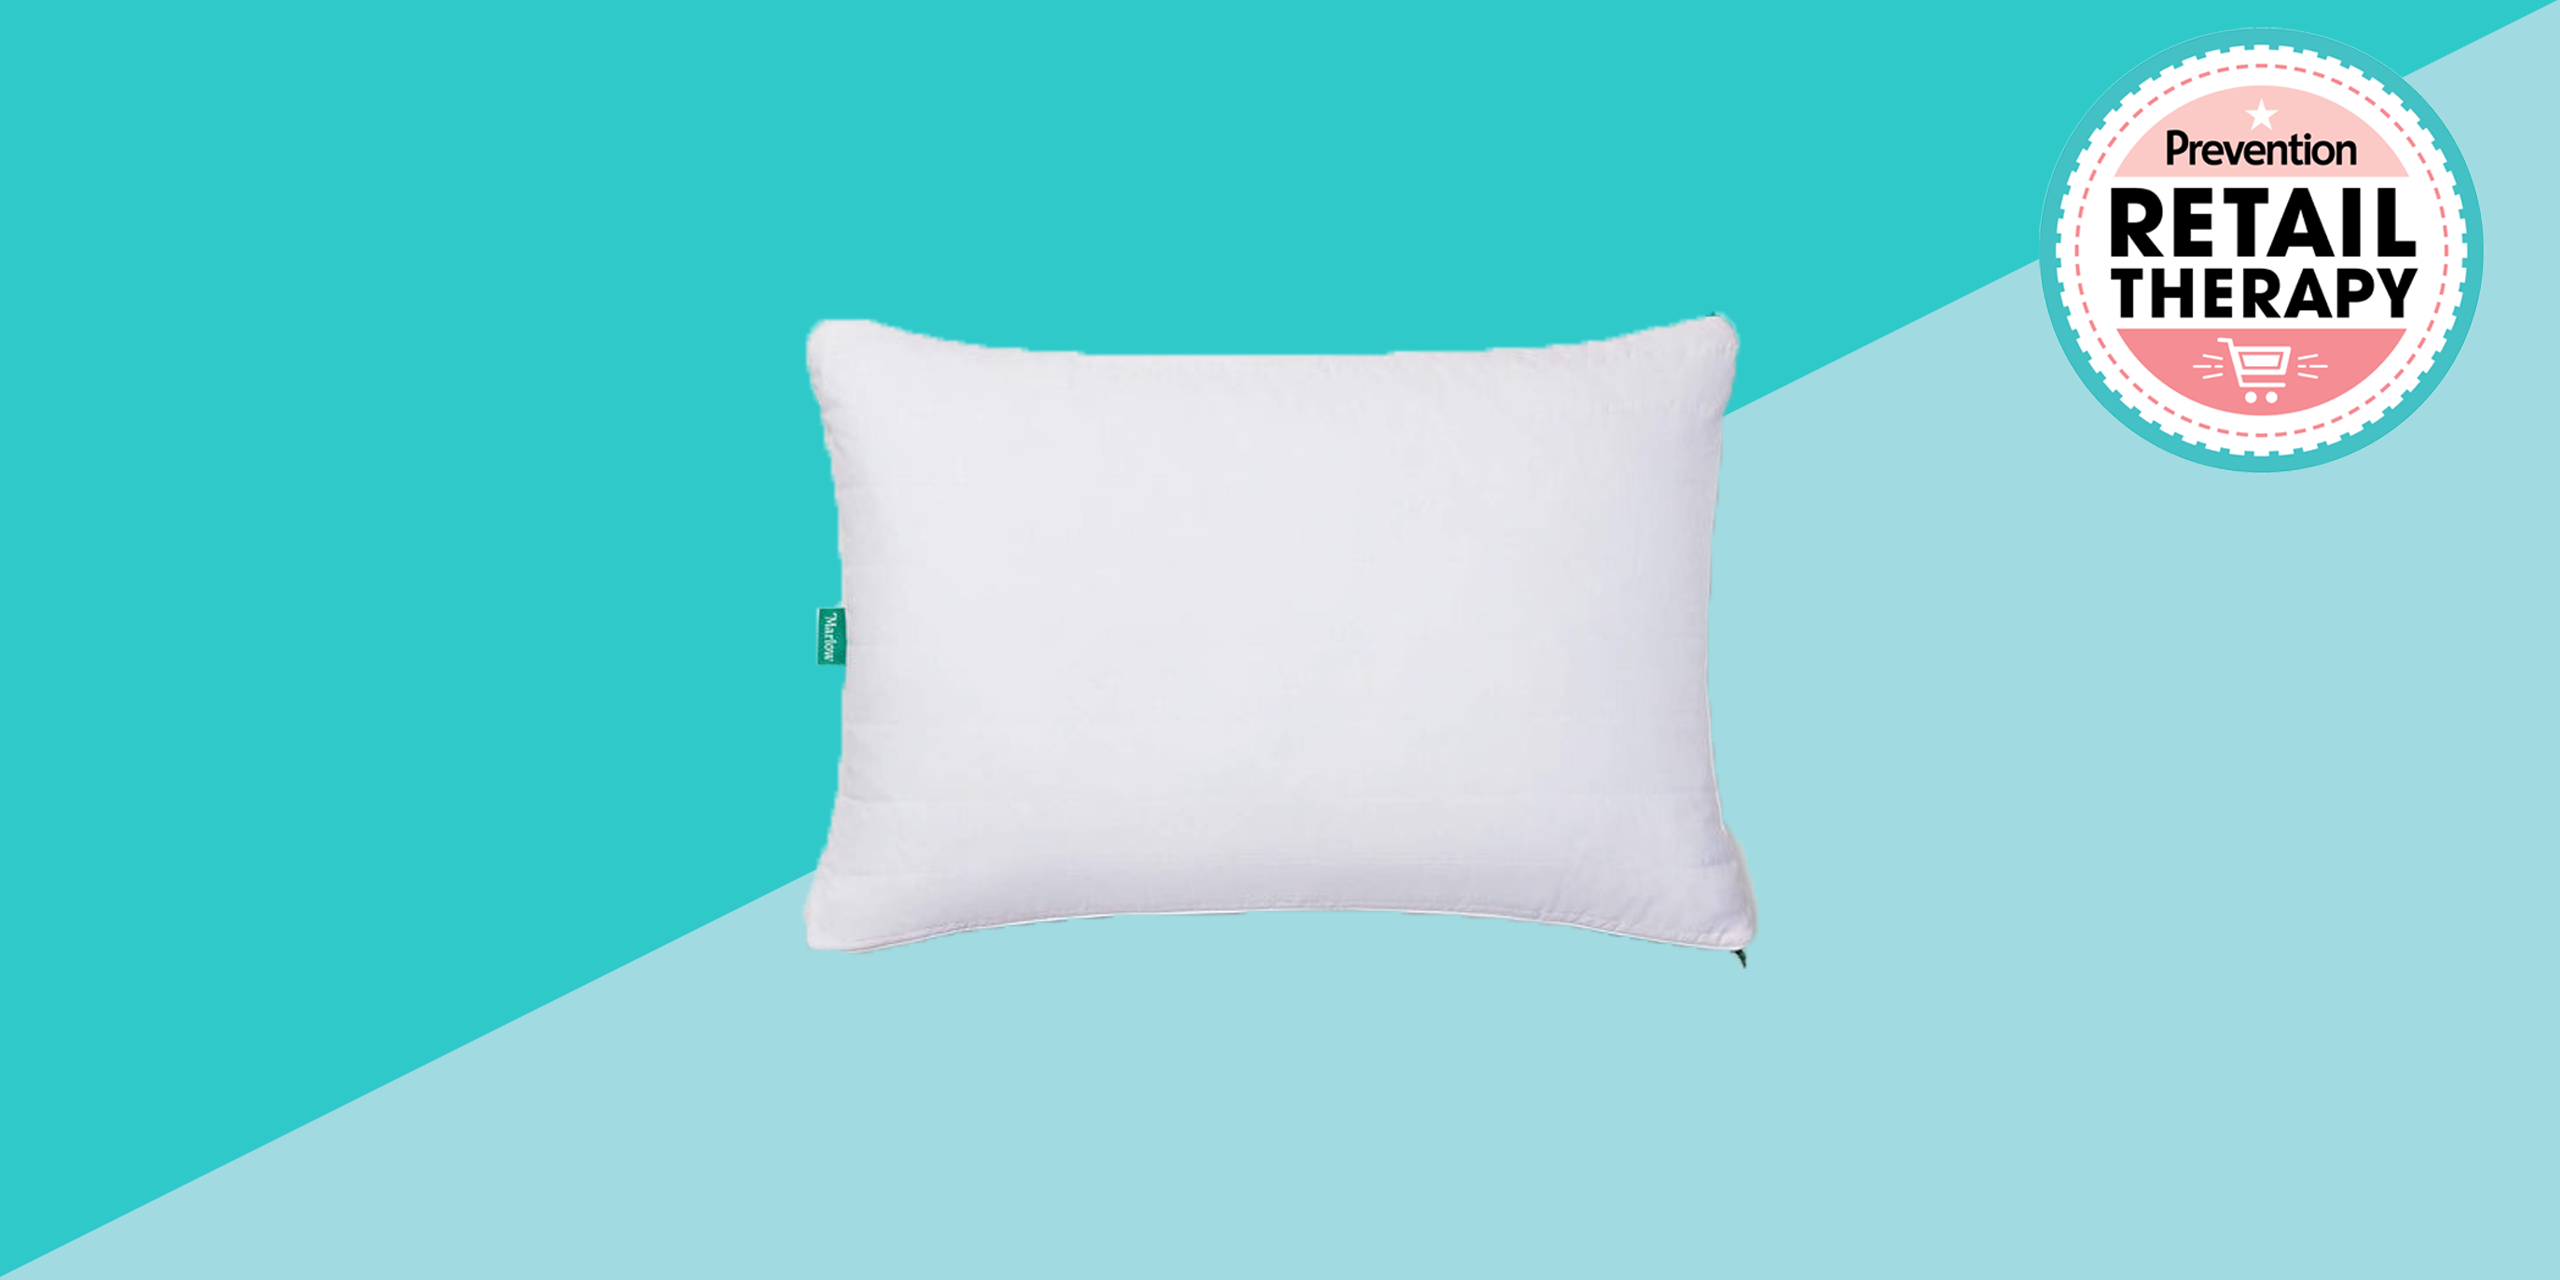 The Marlow Pillow